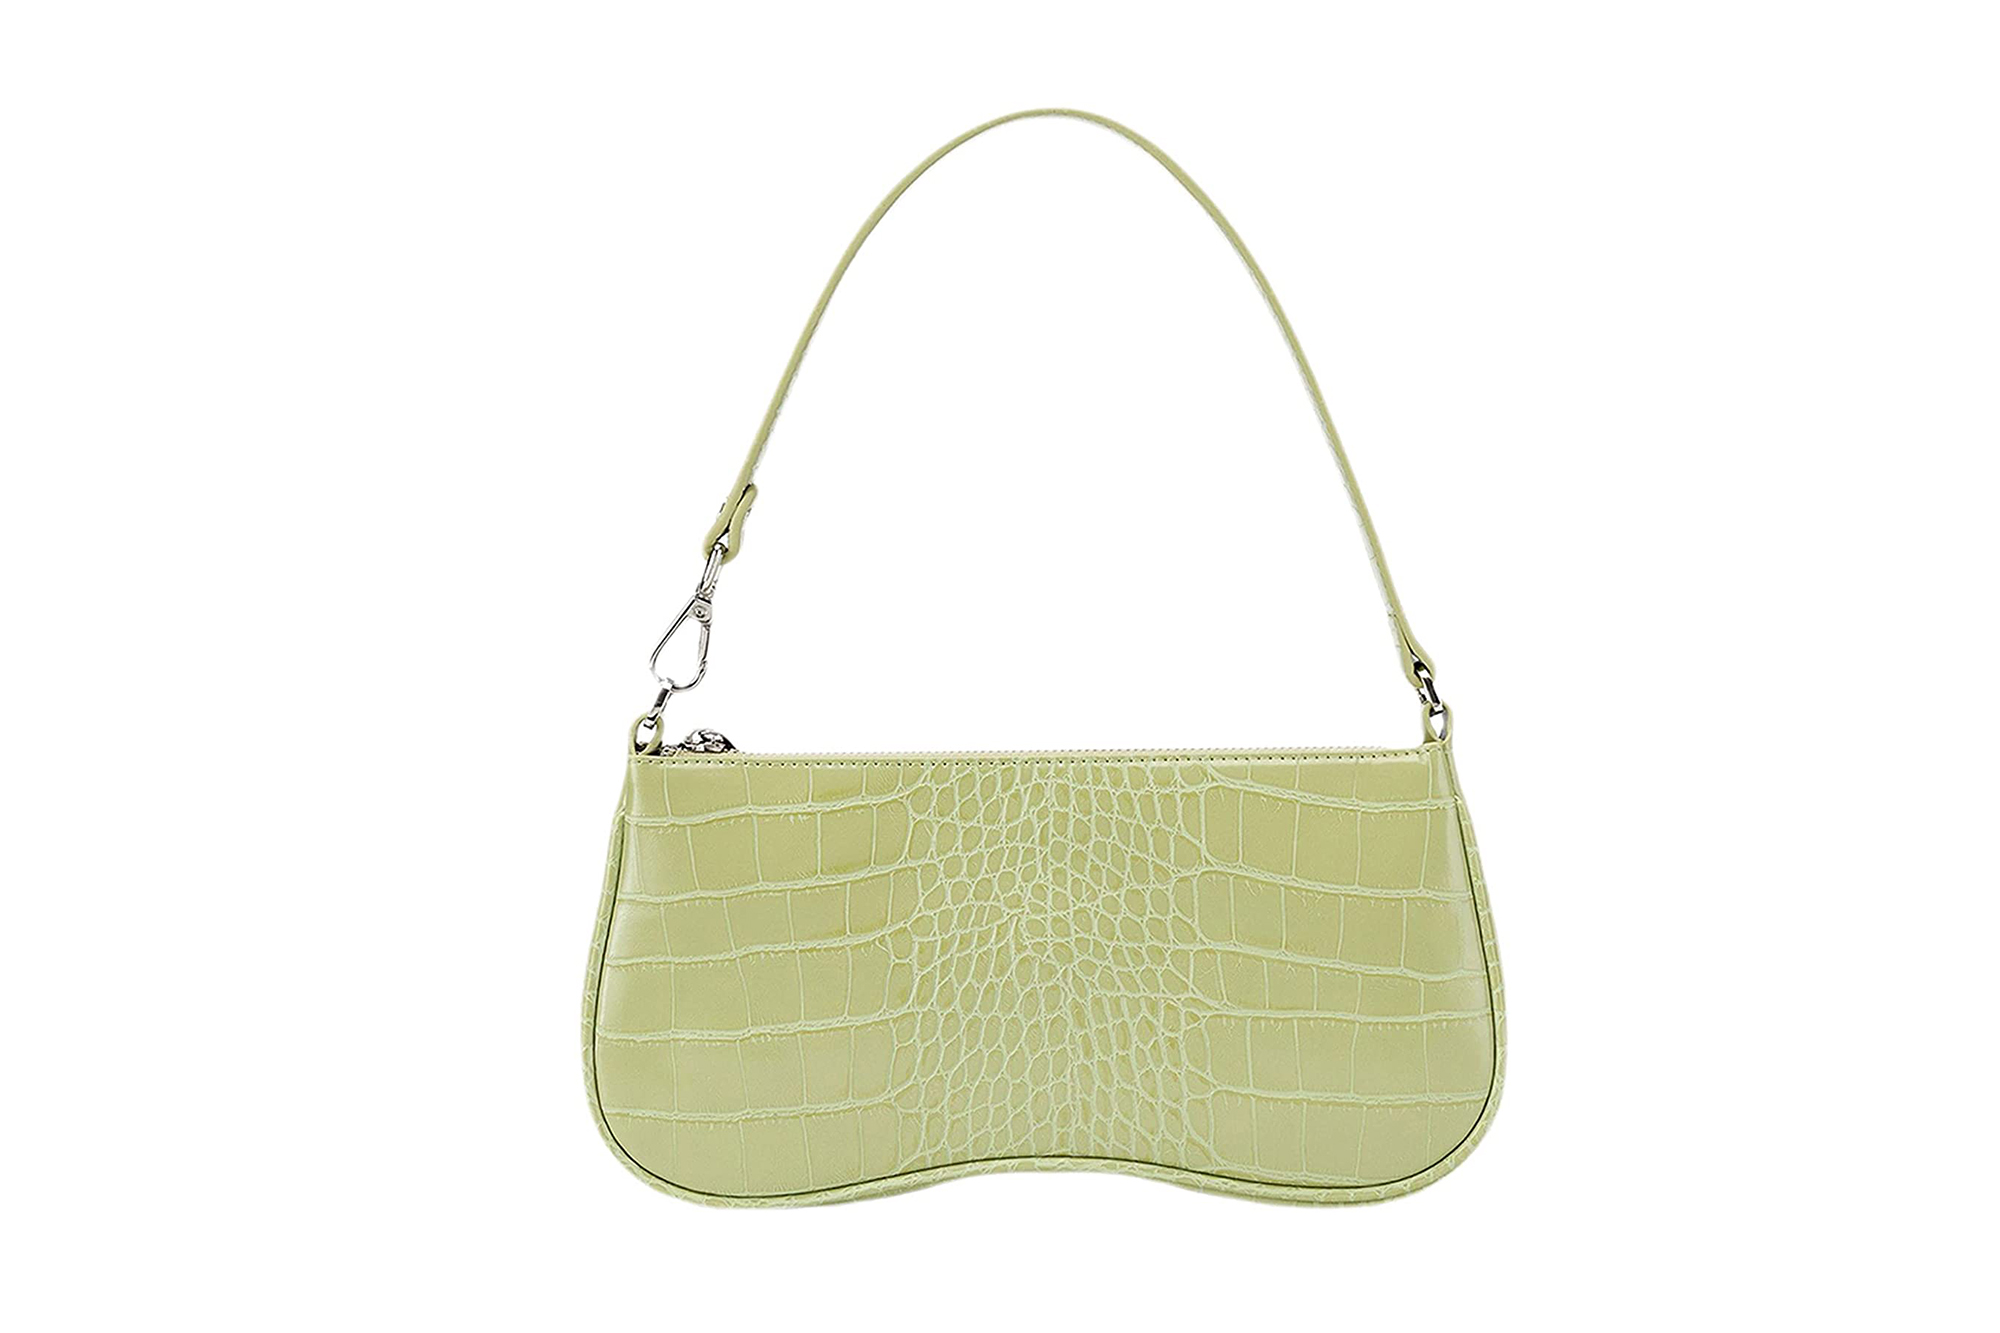 Crocodile Purses: What You Need to Know